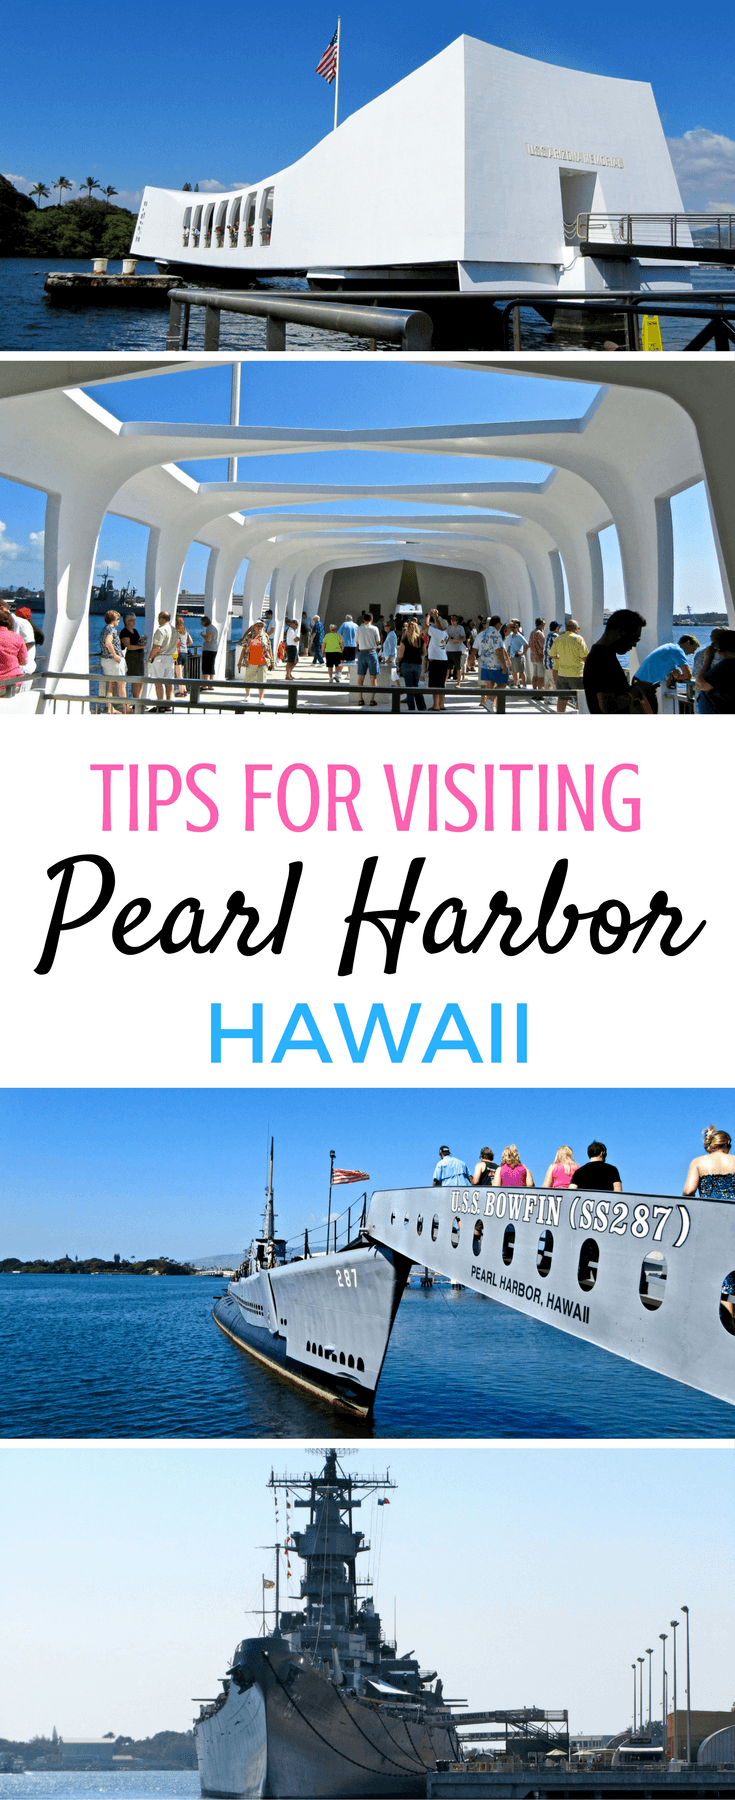 Tips for visiting Pearl Harbor